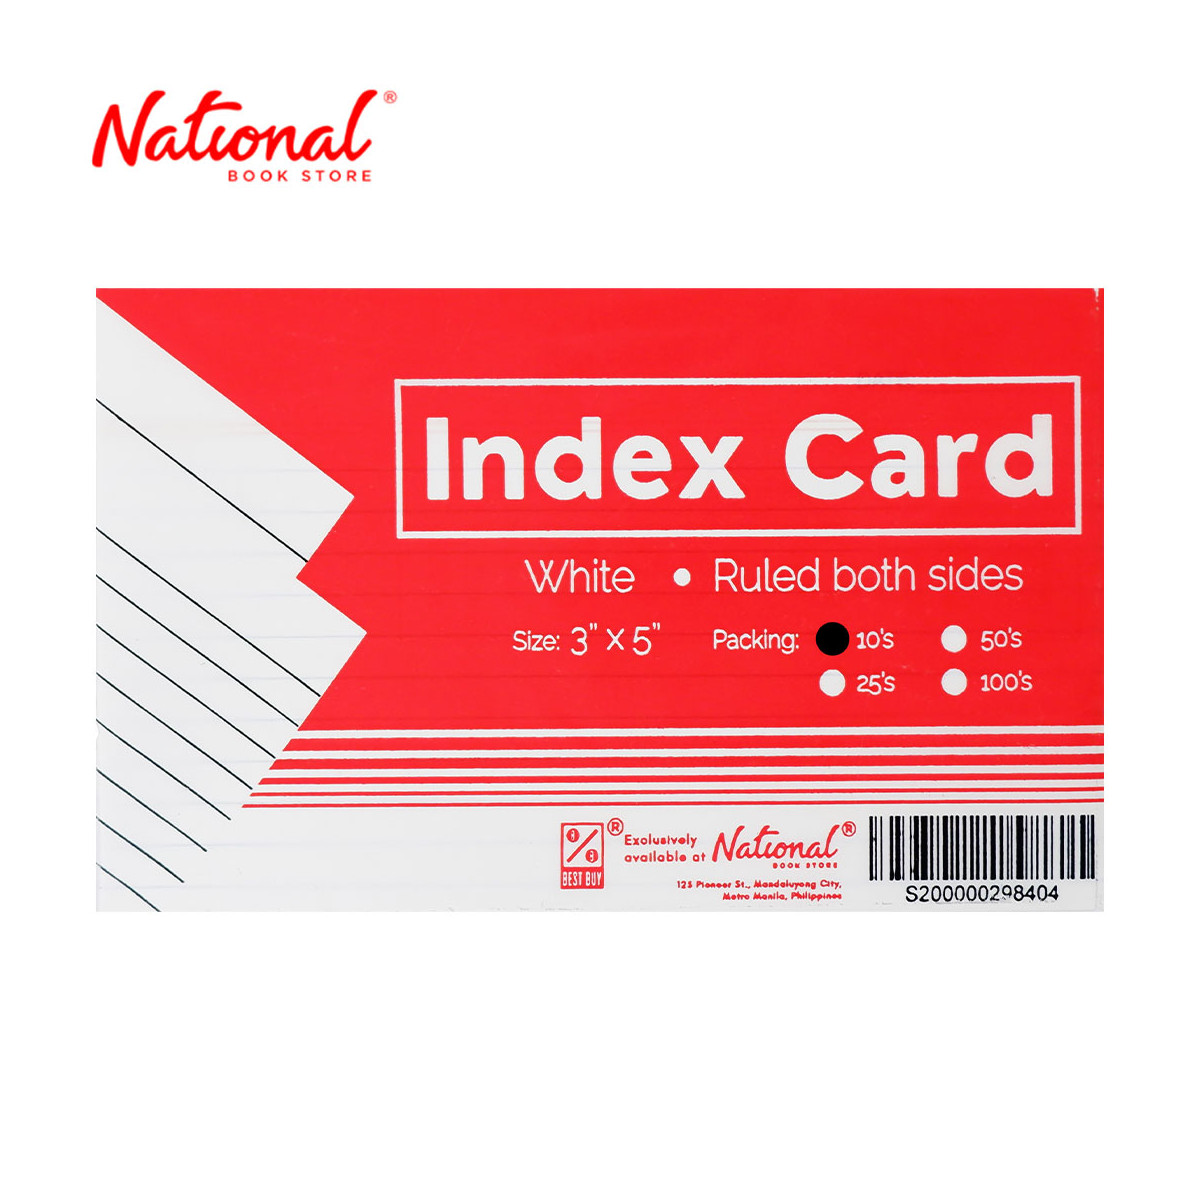 Best Buy Index Card White 3x5 10's Ruled Both Sides - School & Office Supplies